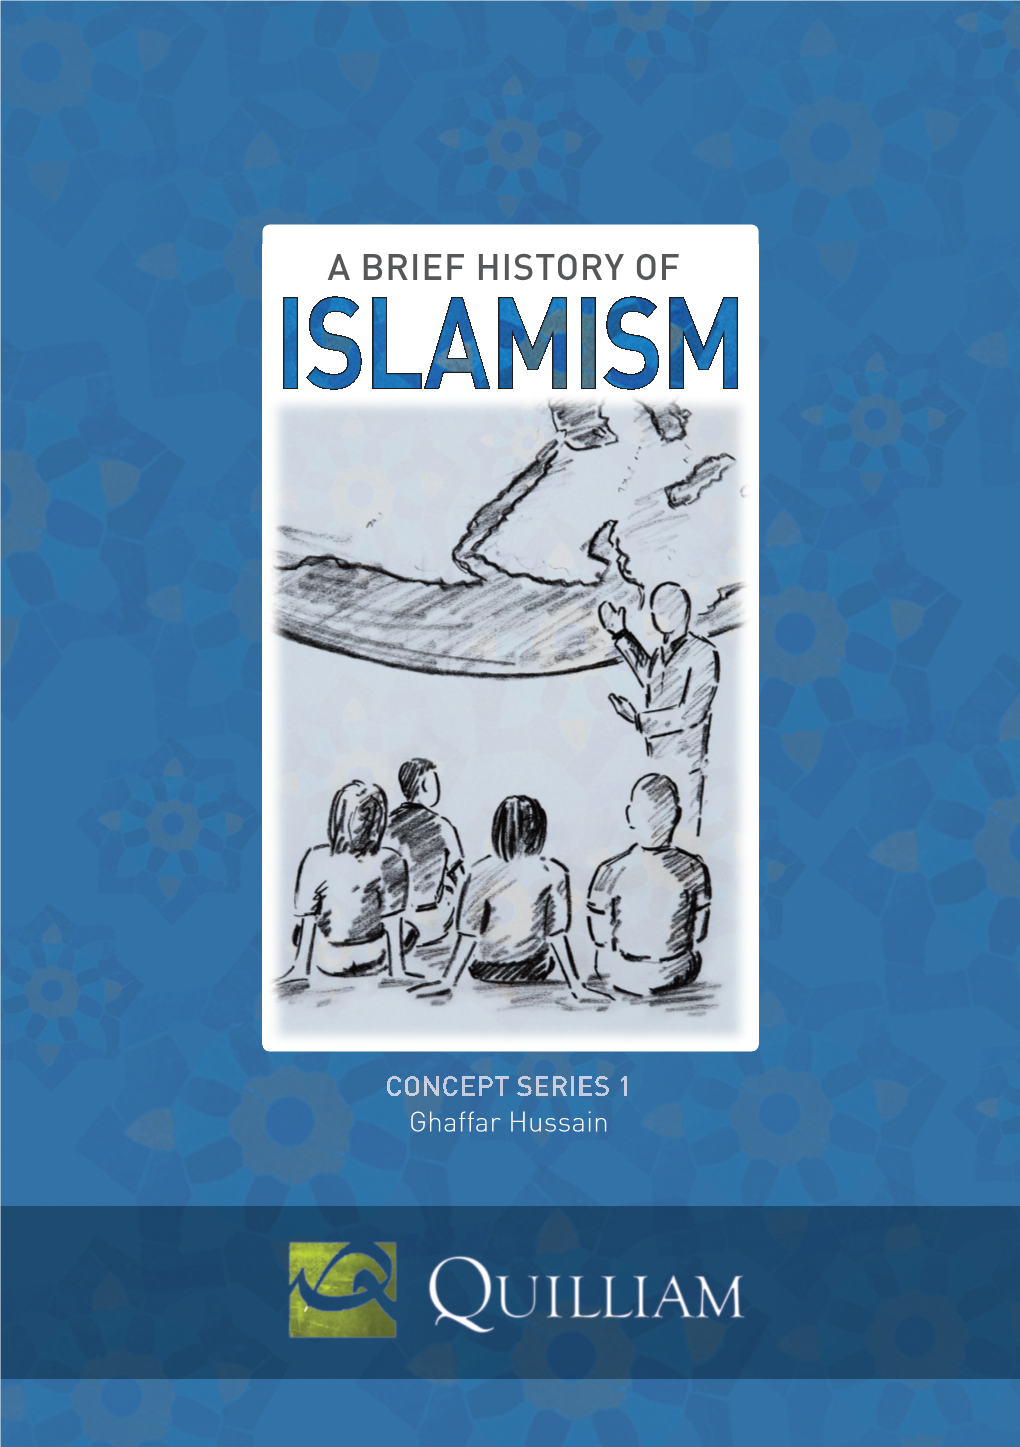 A BRIEF HISTORY of ISLAMISM Quilliam, January 2010